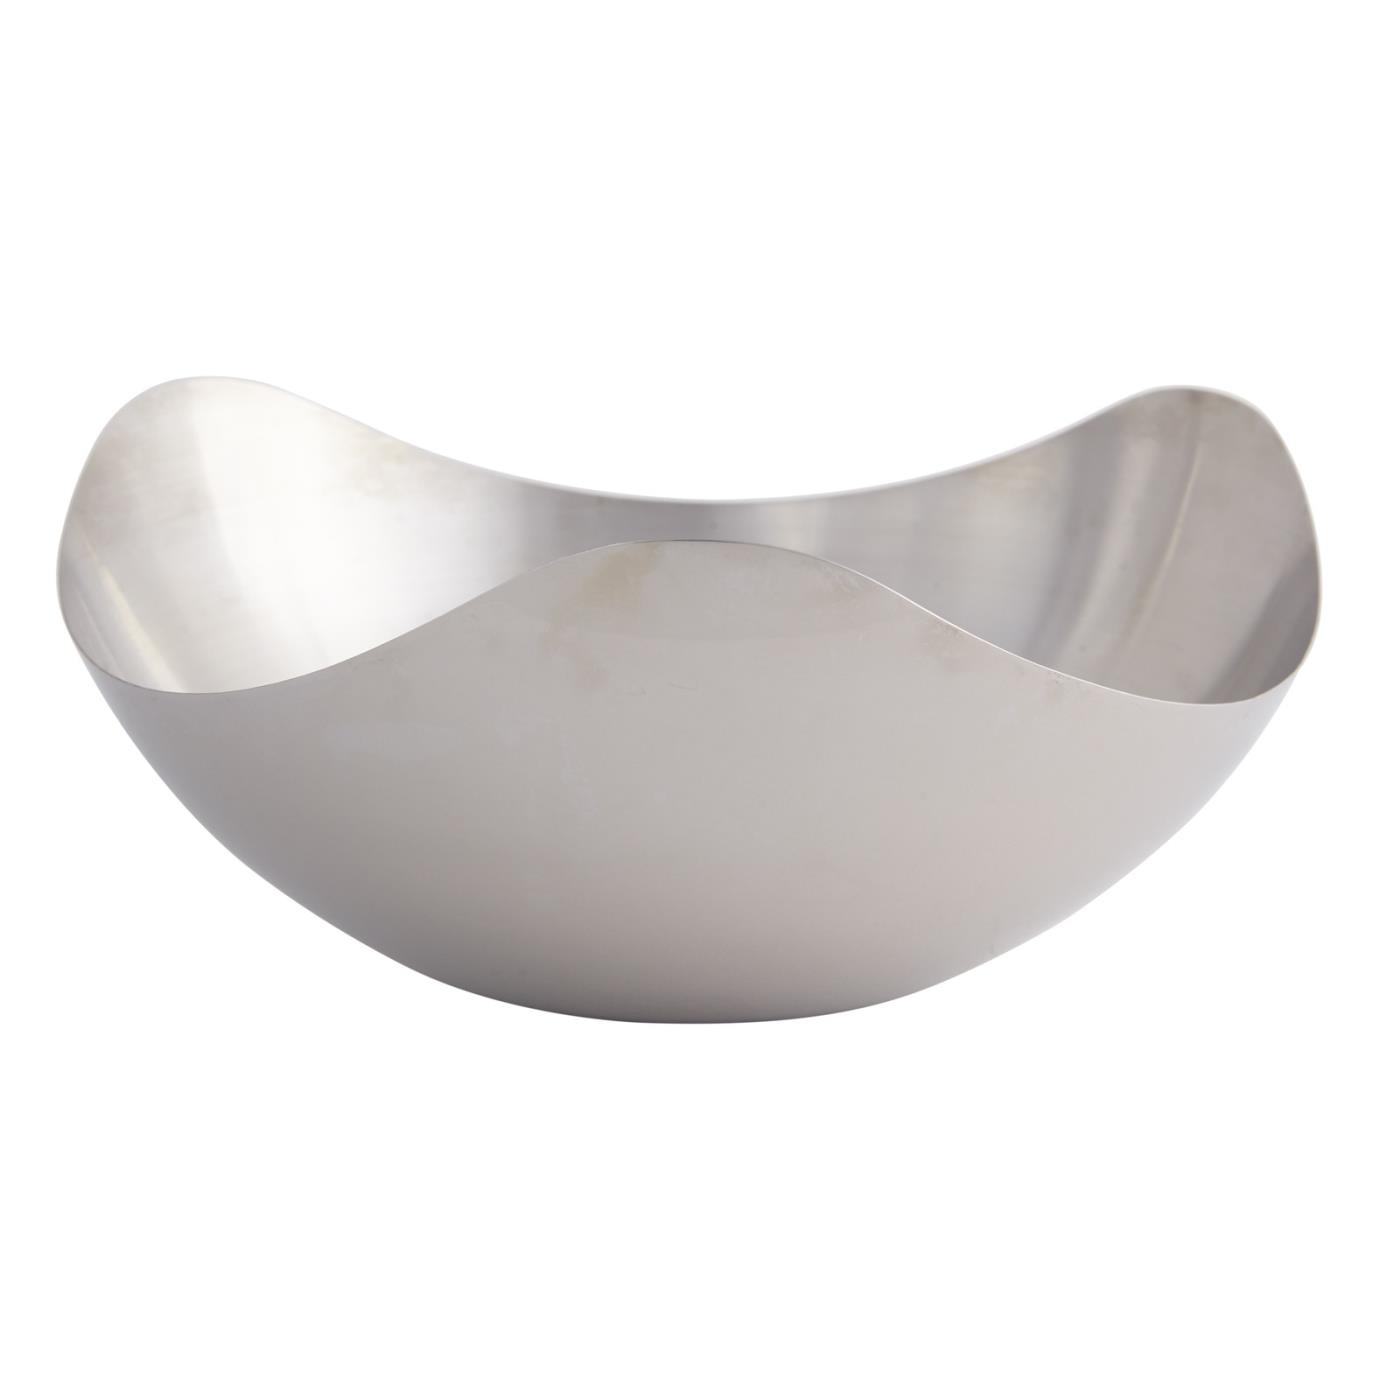 Stainless Steel Wave Bowl - 9.5"